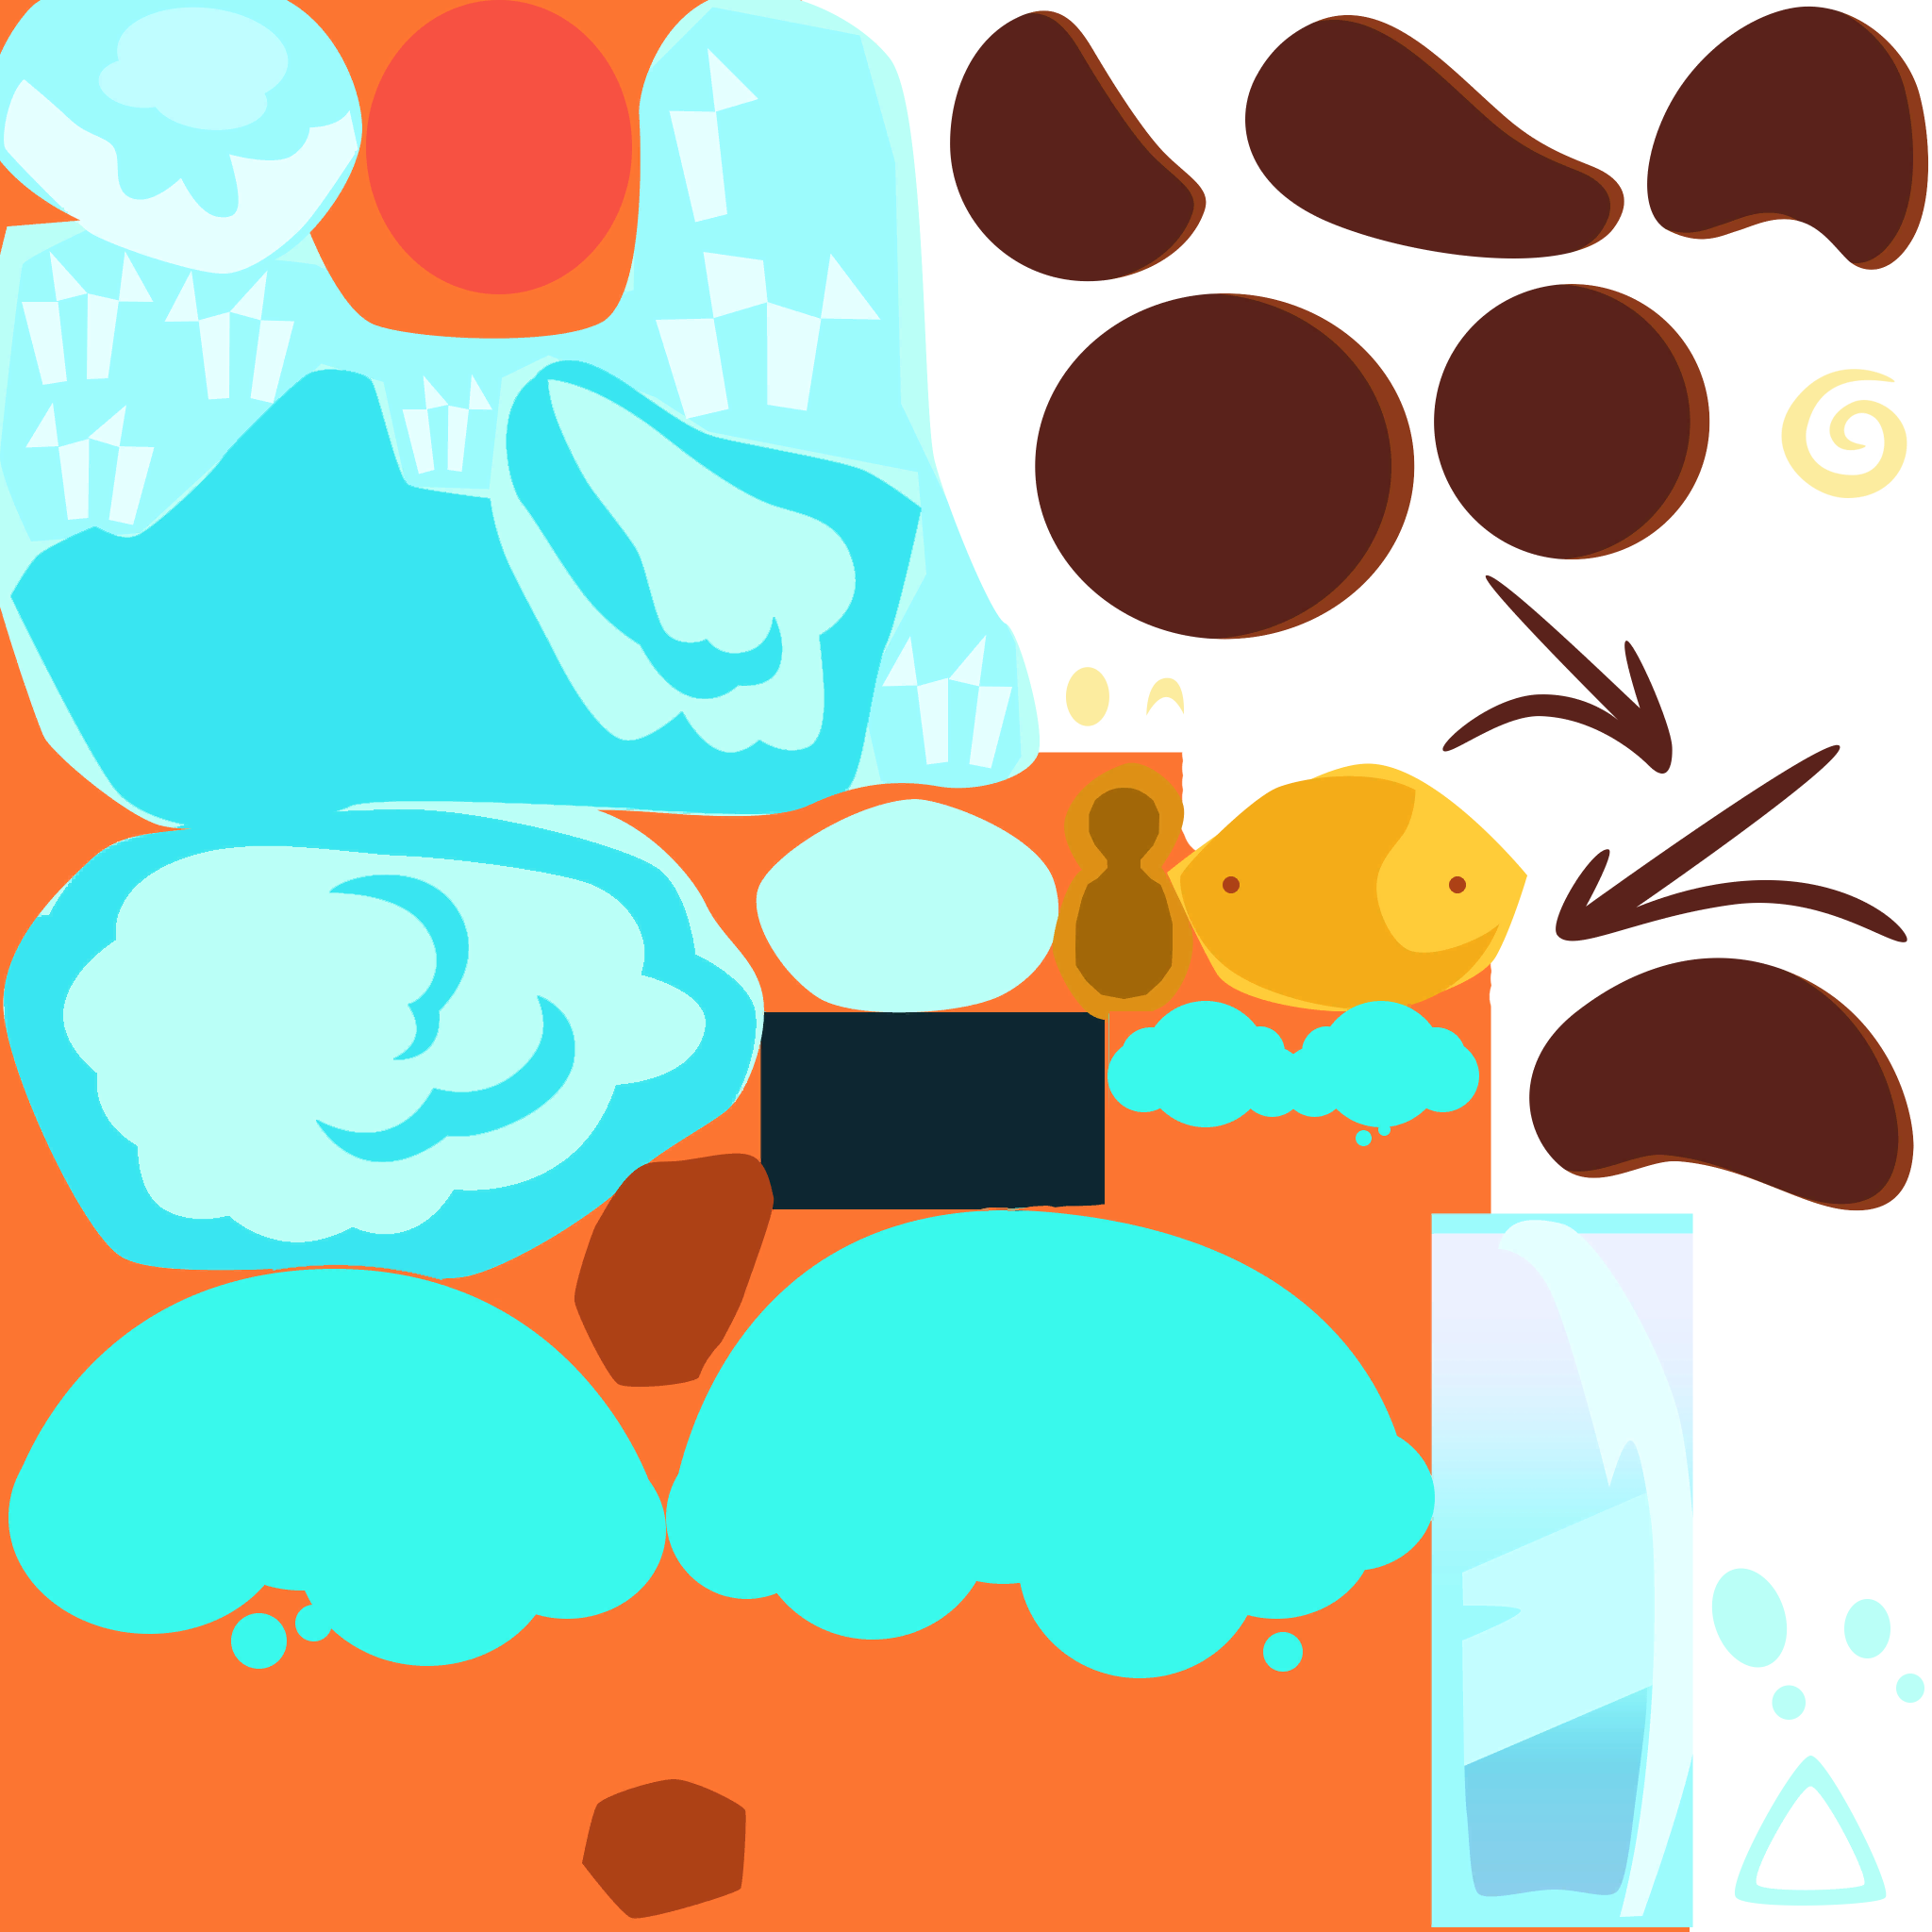 PC / Computer - Slime Rancher 2 - Slime Icons - The Spriters Resource